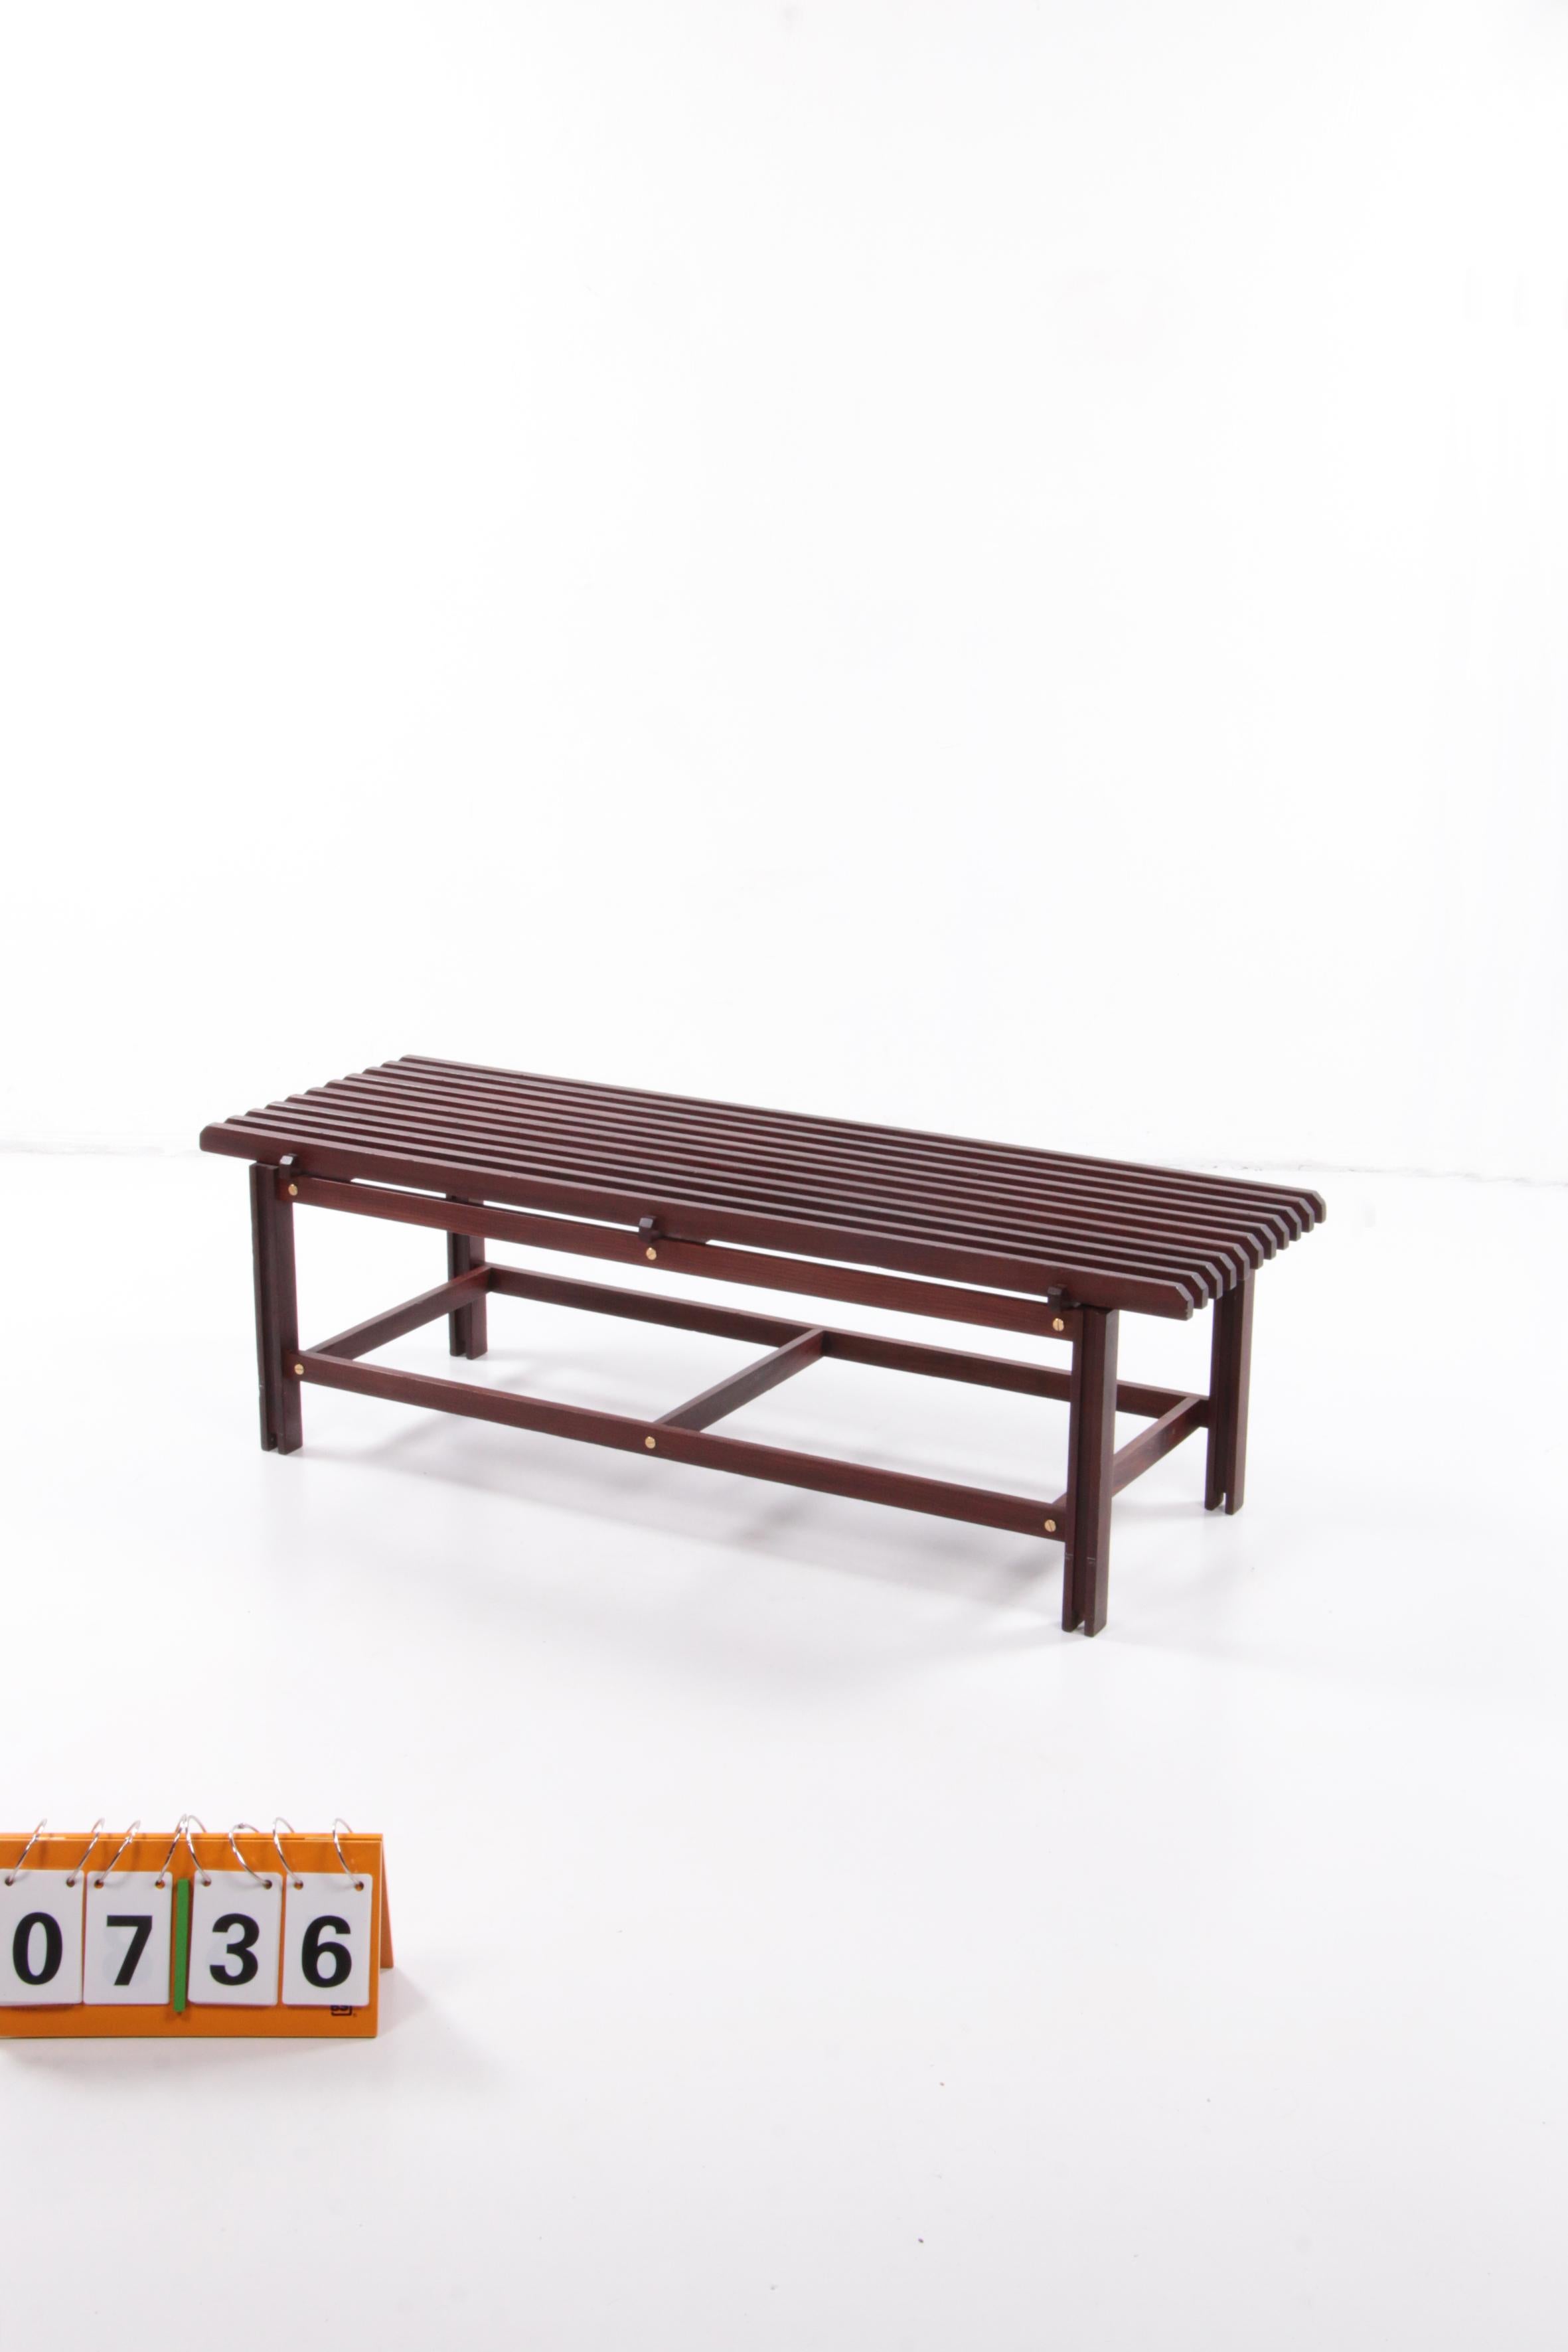 Ico & Luisa Parisi Designed Wooden Bench Made in Italy in 1960 7